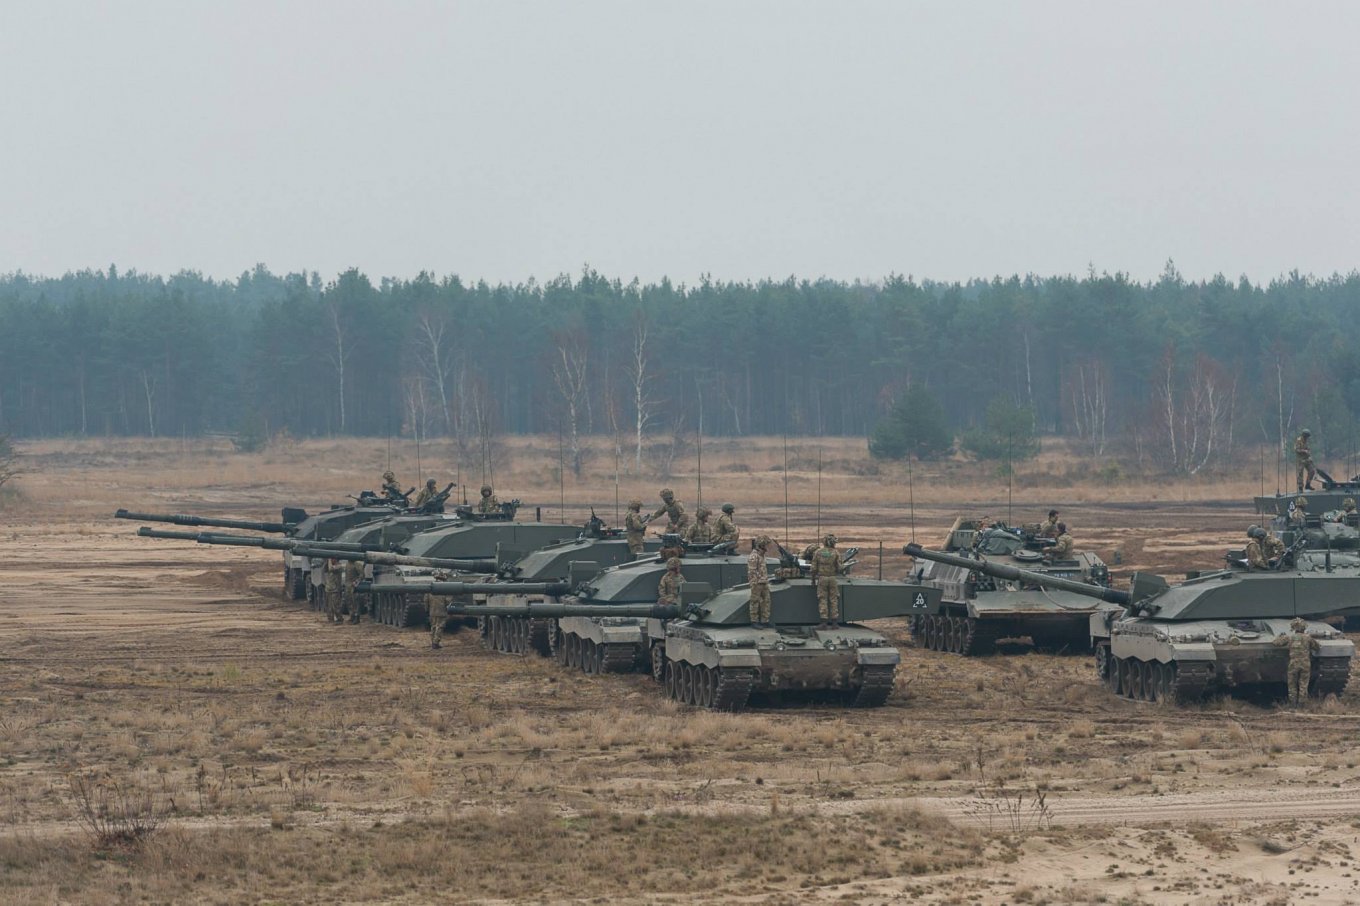 The Challenger 2 Tanks Supply to Be In May-June: London Explained the Reason For the Delay, Defense Express, war in Ukraine, Russian-Ukrainian war